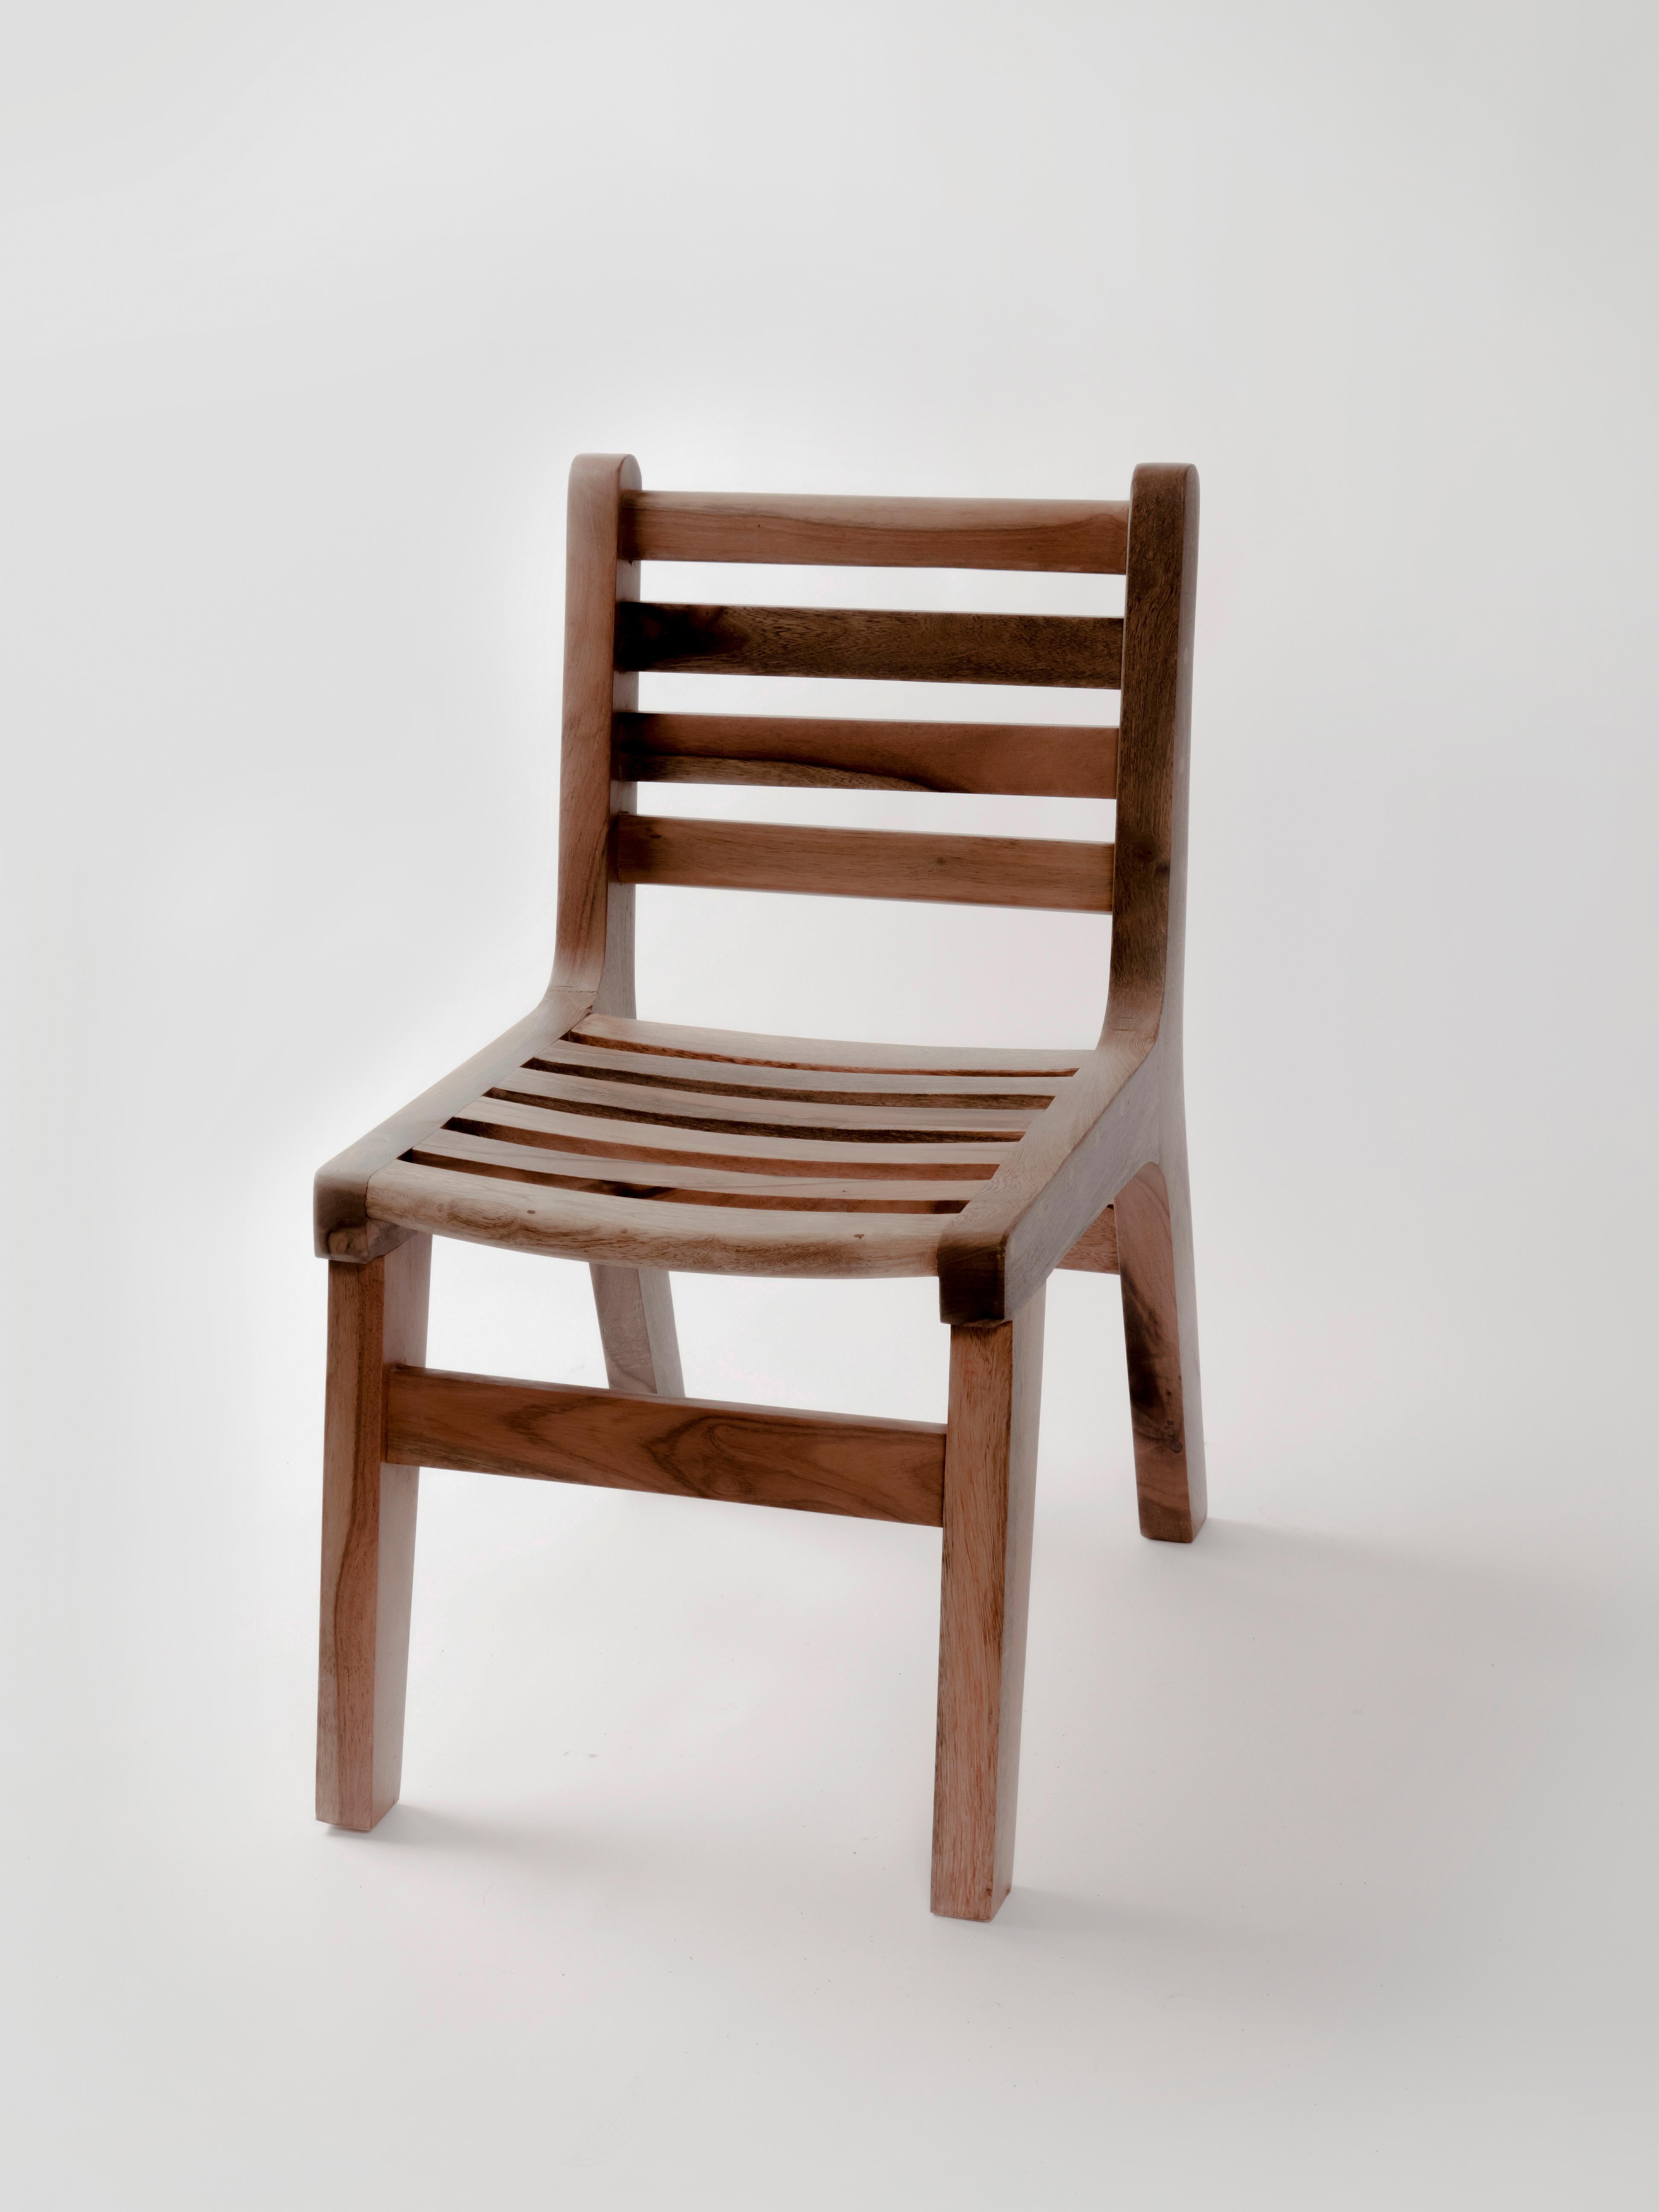 Chair 02 by Daniel Orozco
Material: Solid jabin wood
Dimensions: D57.5 X W45  X H80 cm

Solid jabin wood chair with natural finish. Handmade by Mexican artisans.

Daniel Orozco Estudio
We are an inclusive interior design estudio, who love to work